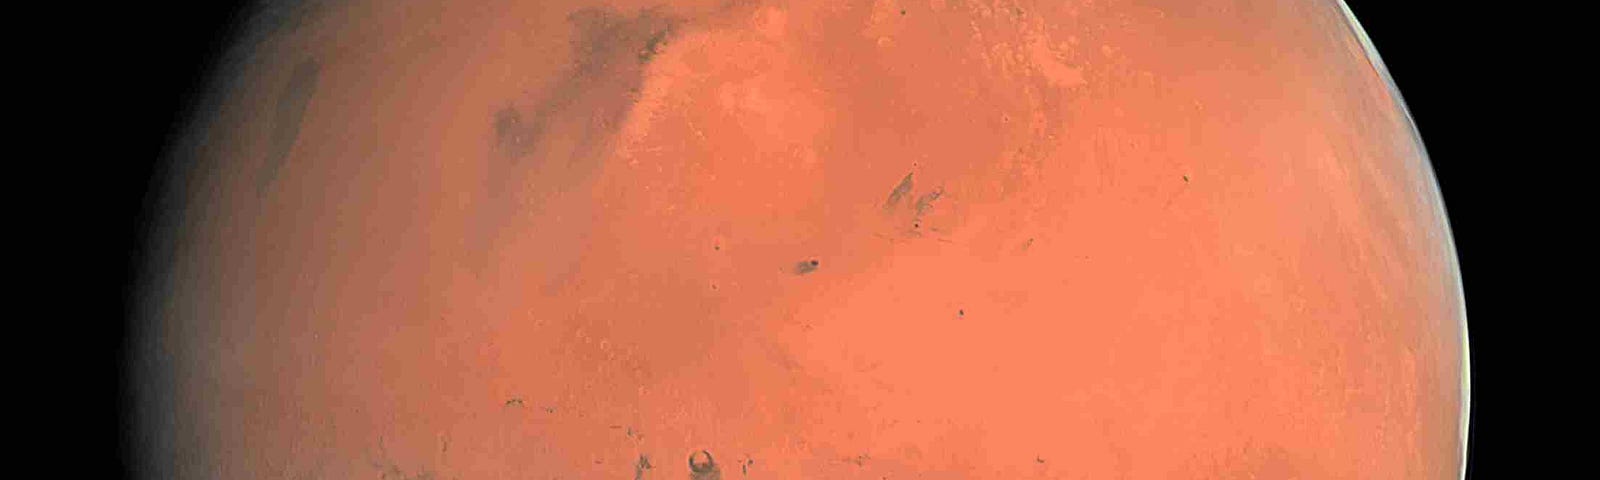 A picture of planet Mars